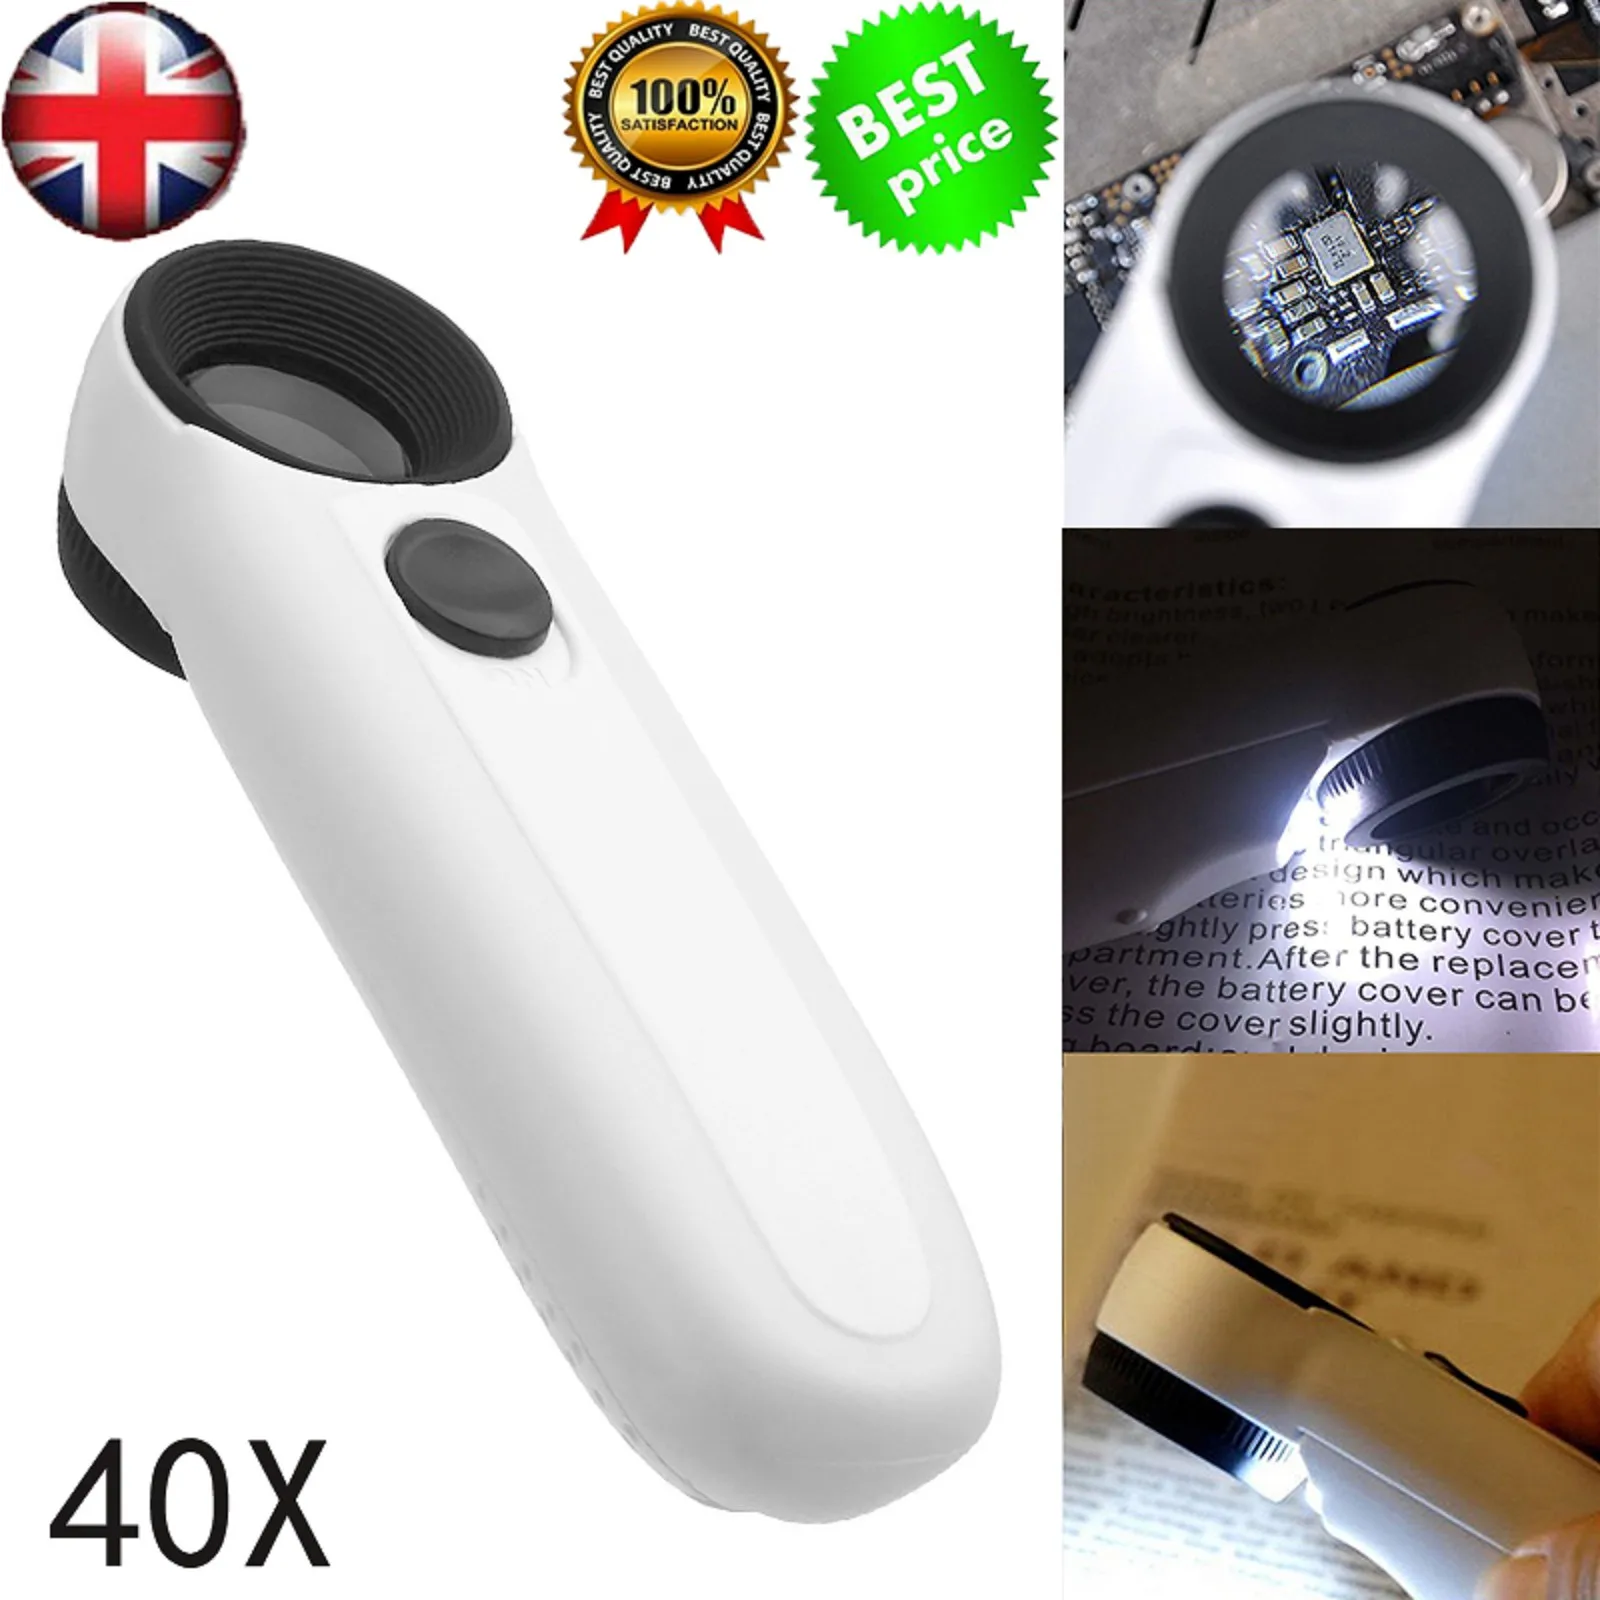 40X Magnifying Magnifier Glass Jeweler Eye Jewelry Loupe with 2 LED Light